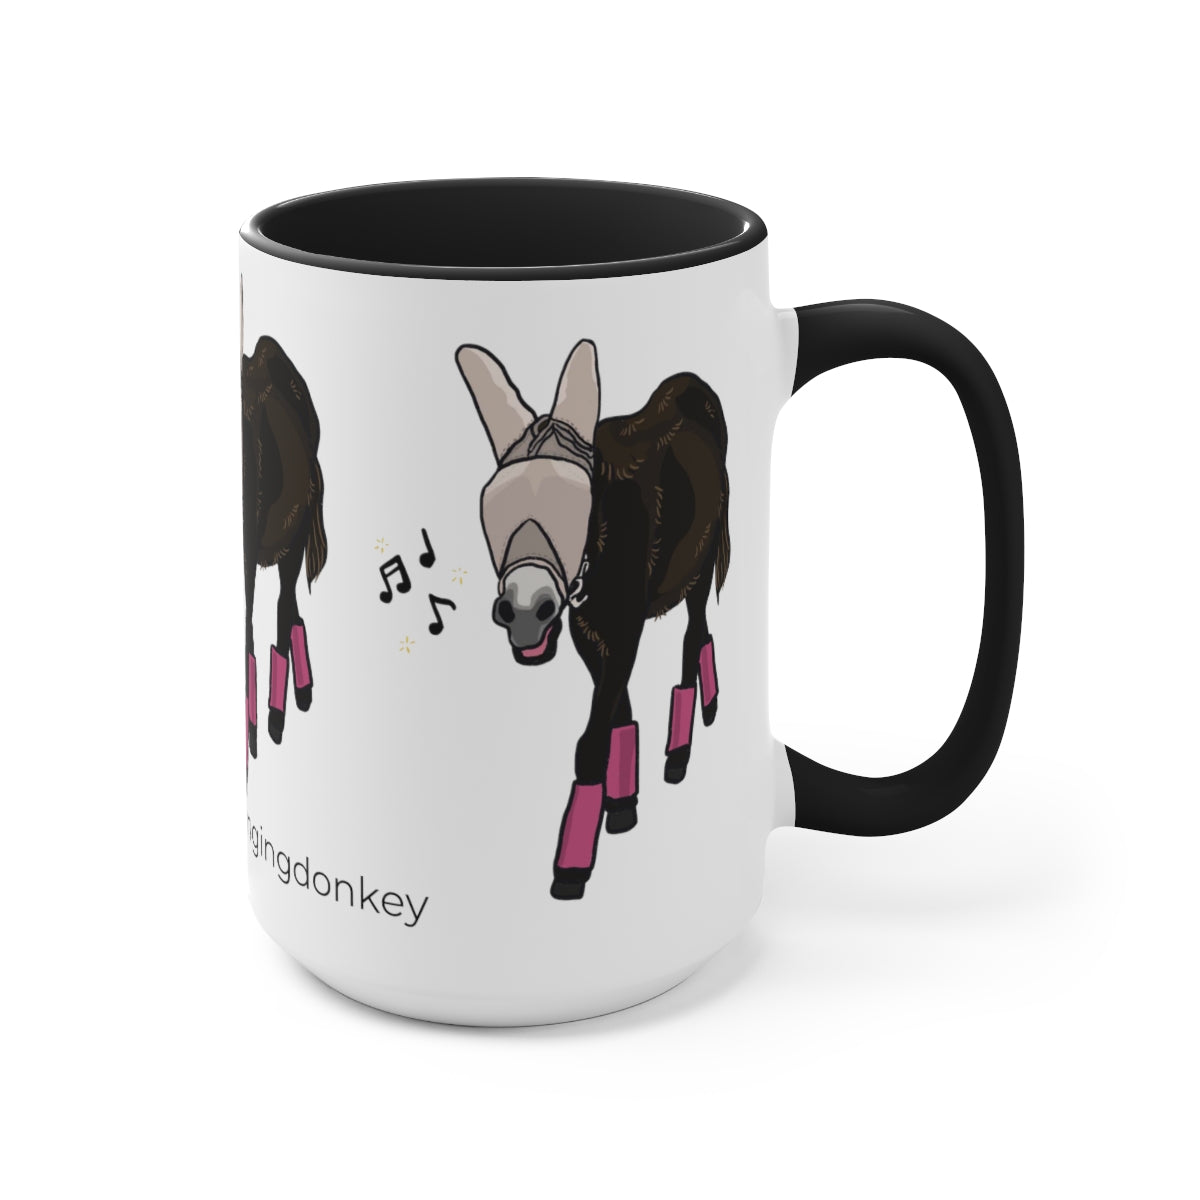 Mornings with Monte the Singing Donkey Fly Gear Two-Tone Mugs, 15oz